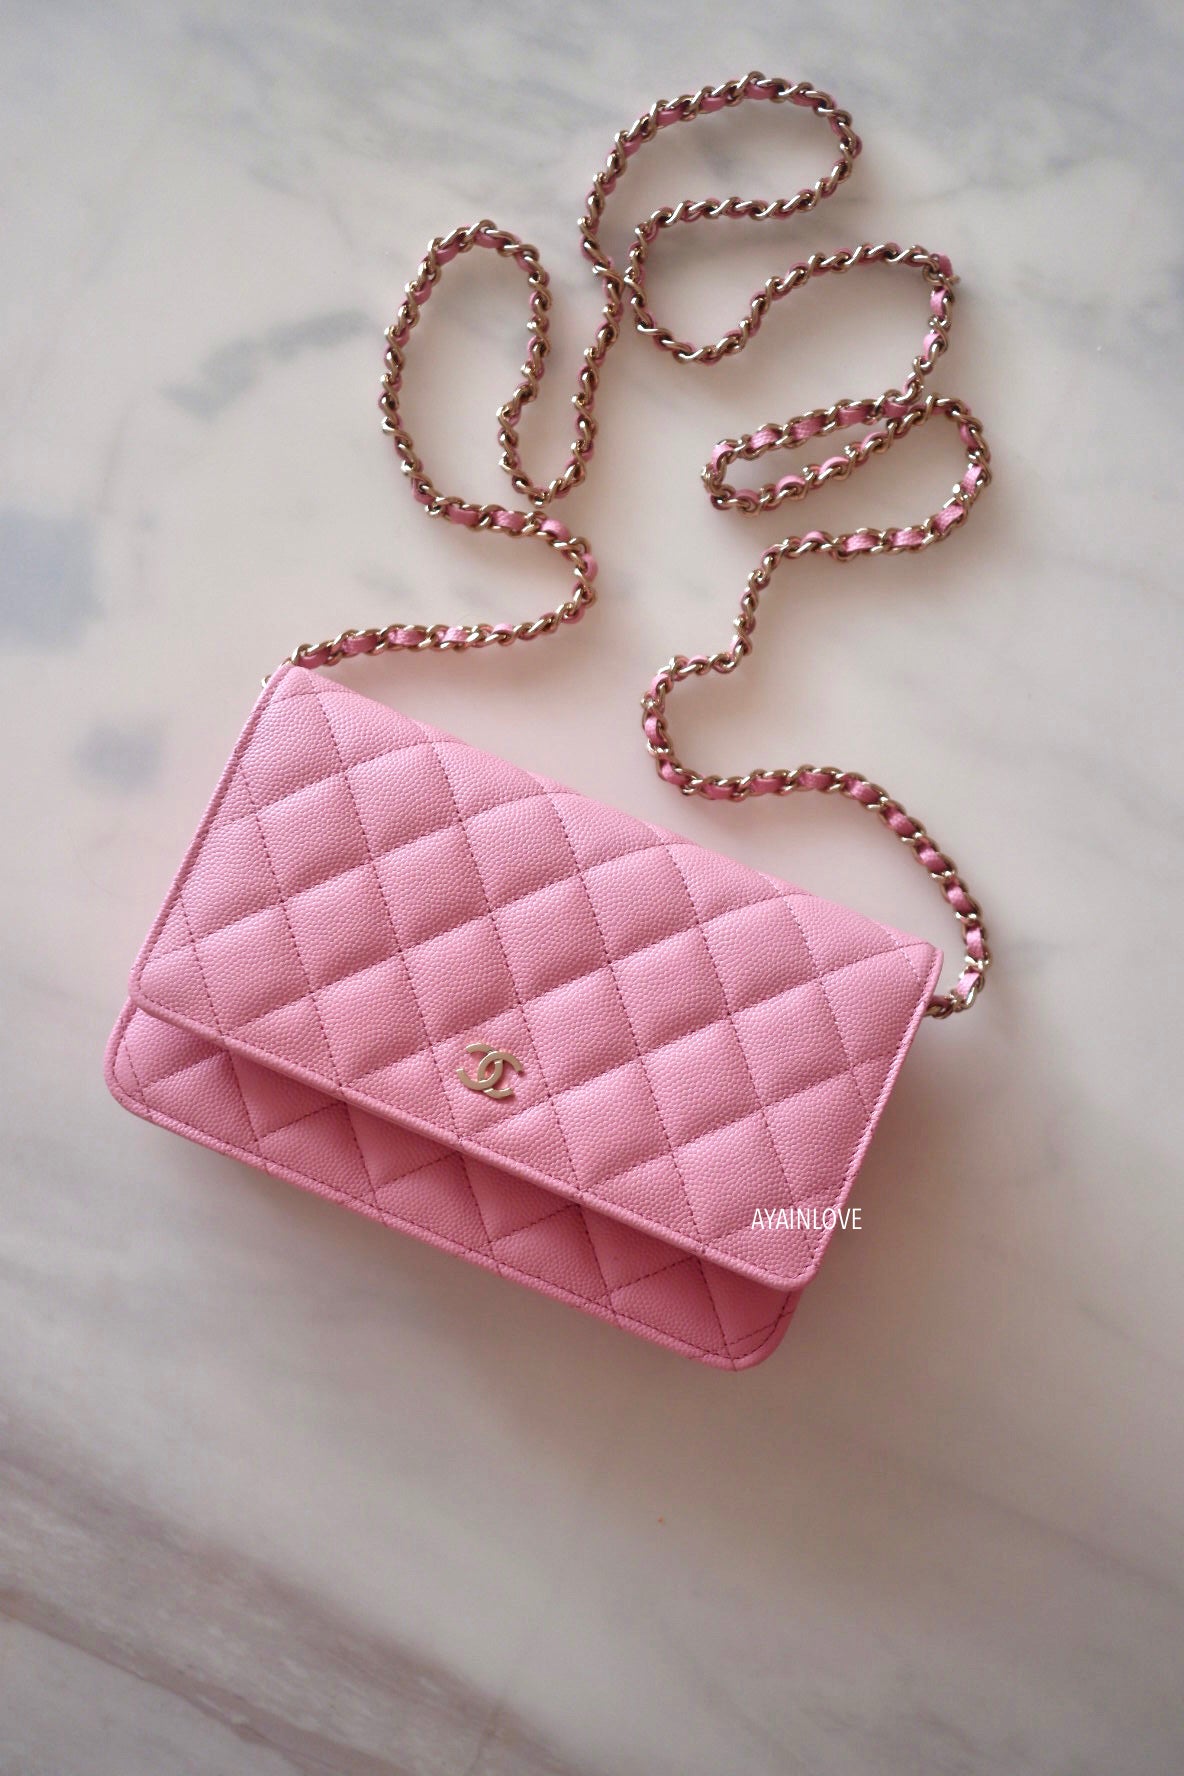 Chanel Vintage Pink Caviar Timeless Wallet On Chain WOC